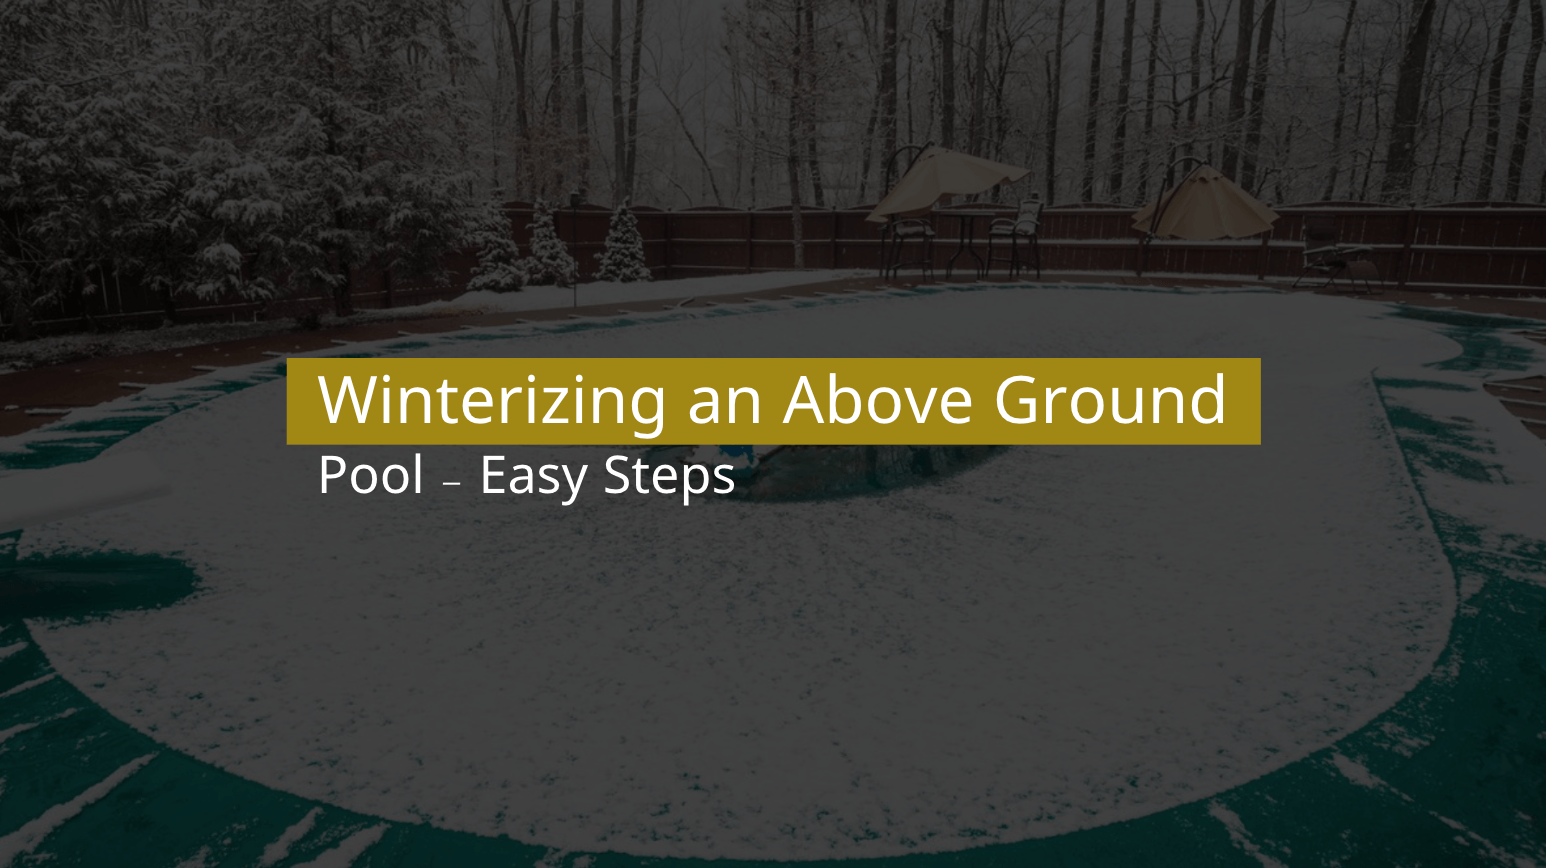 Winterizing an Above Ground Pool - Easy Steps